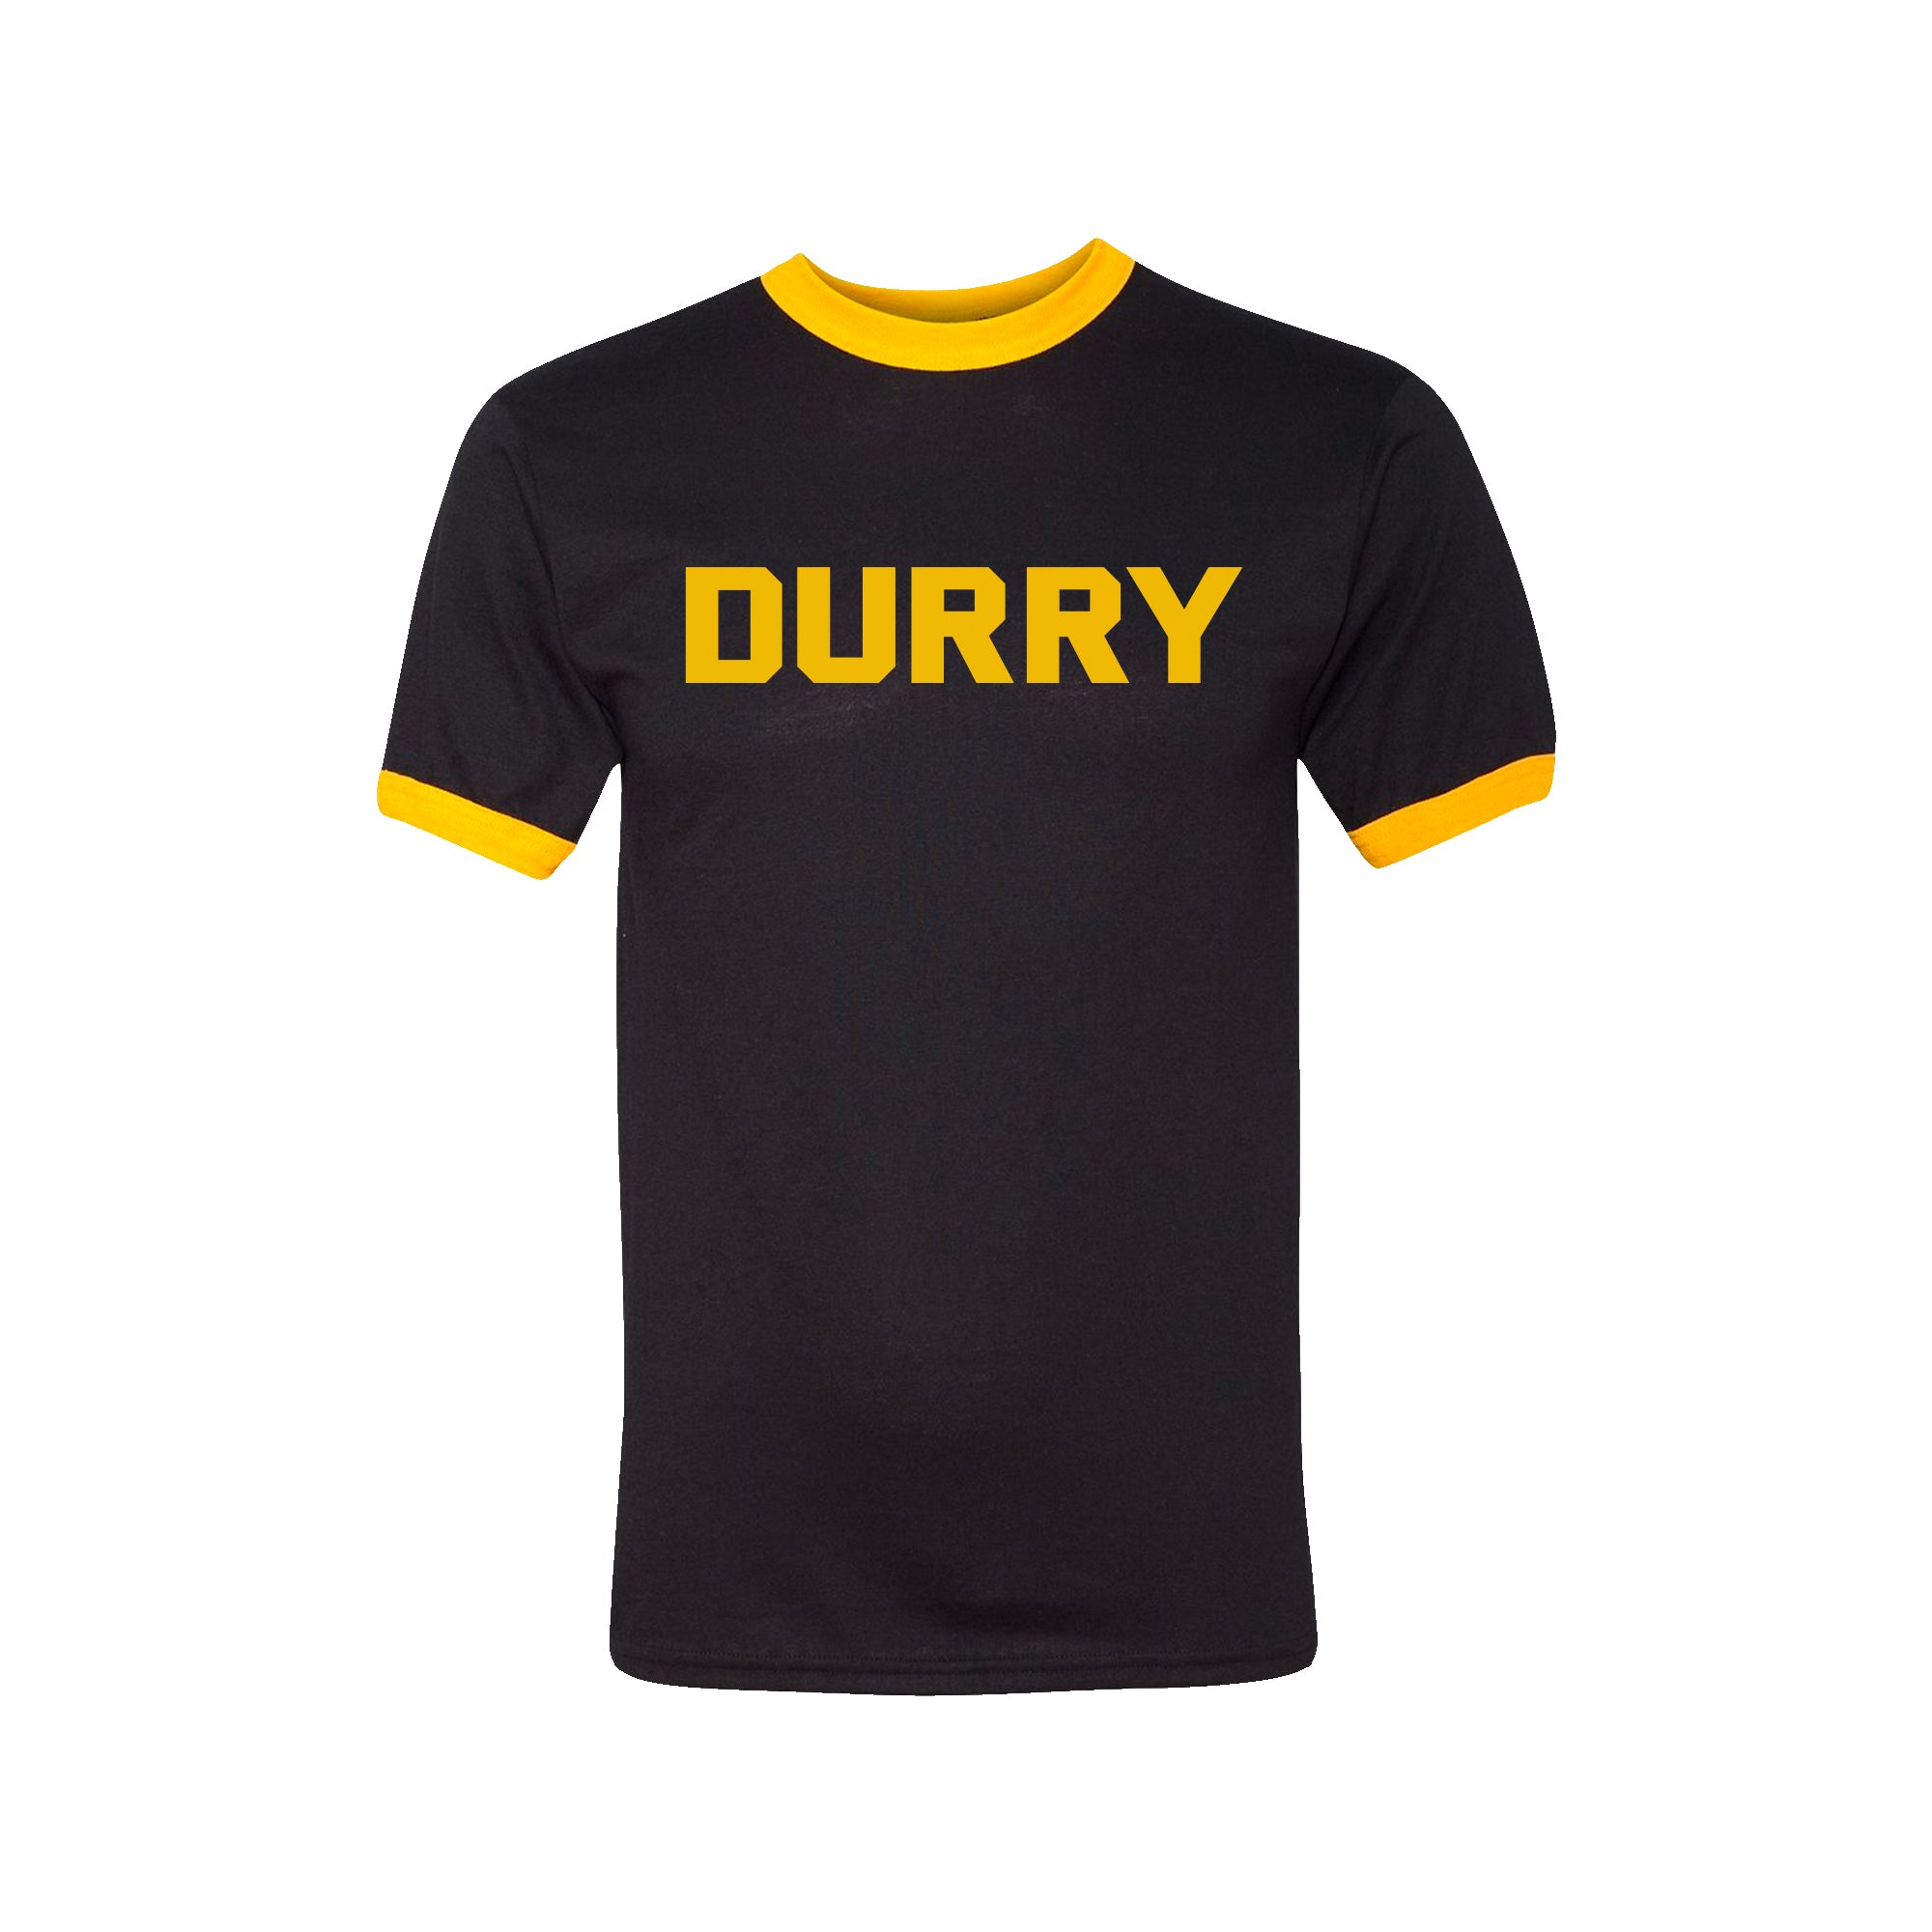 Durry Ringer Tee – Durry Music